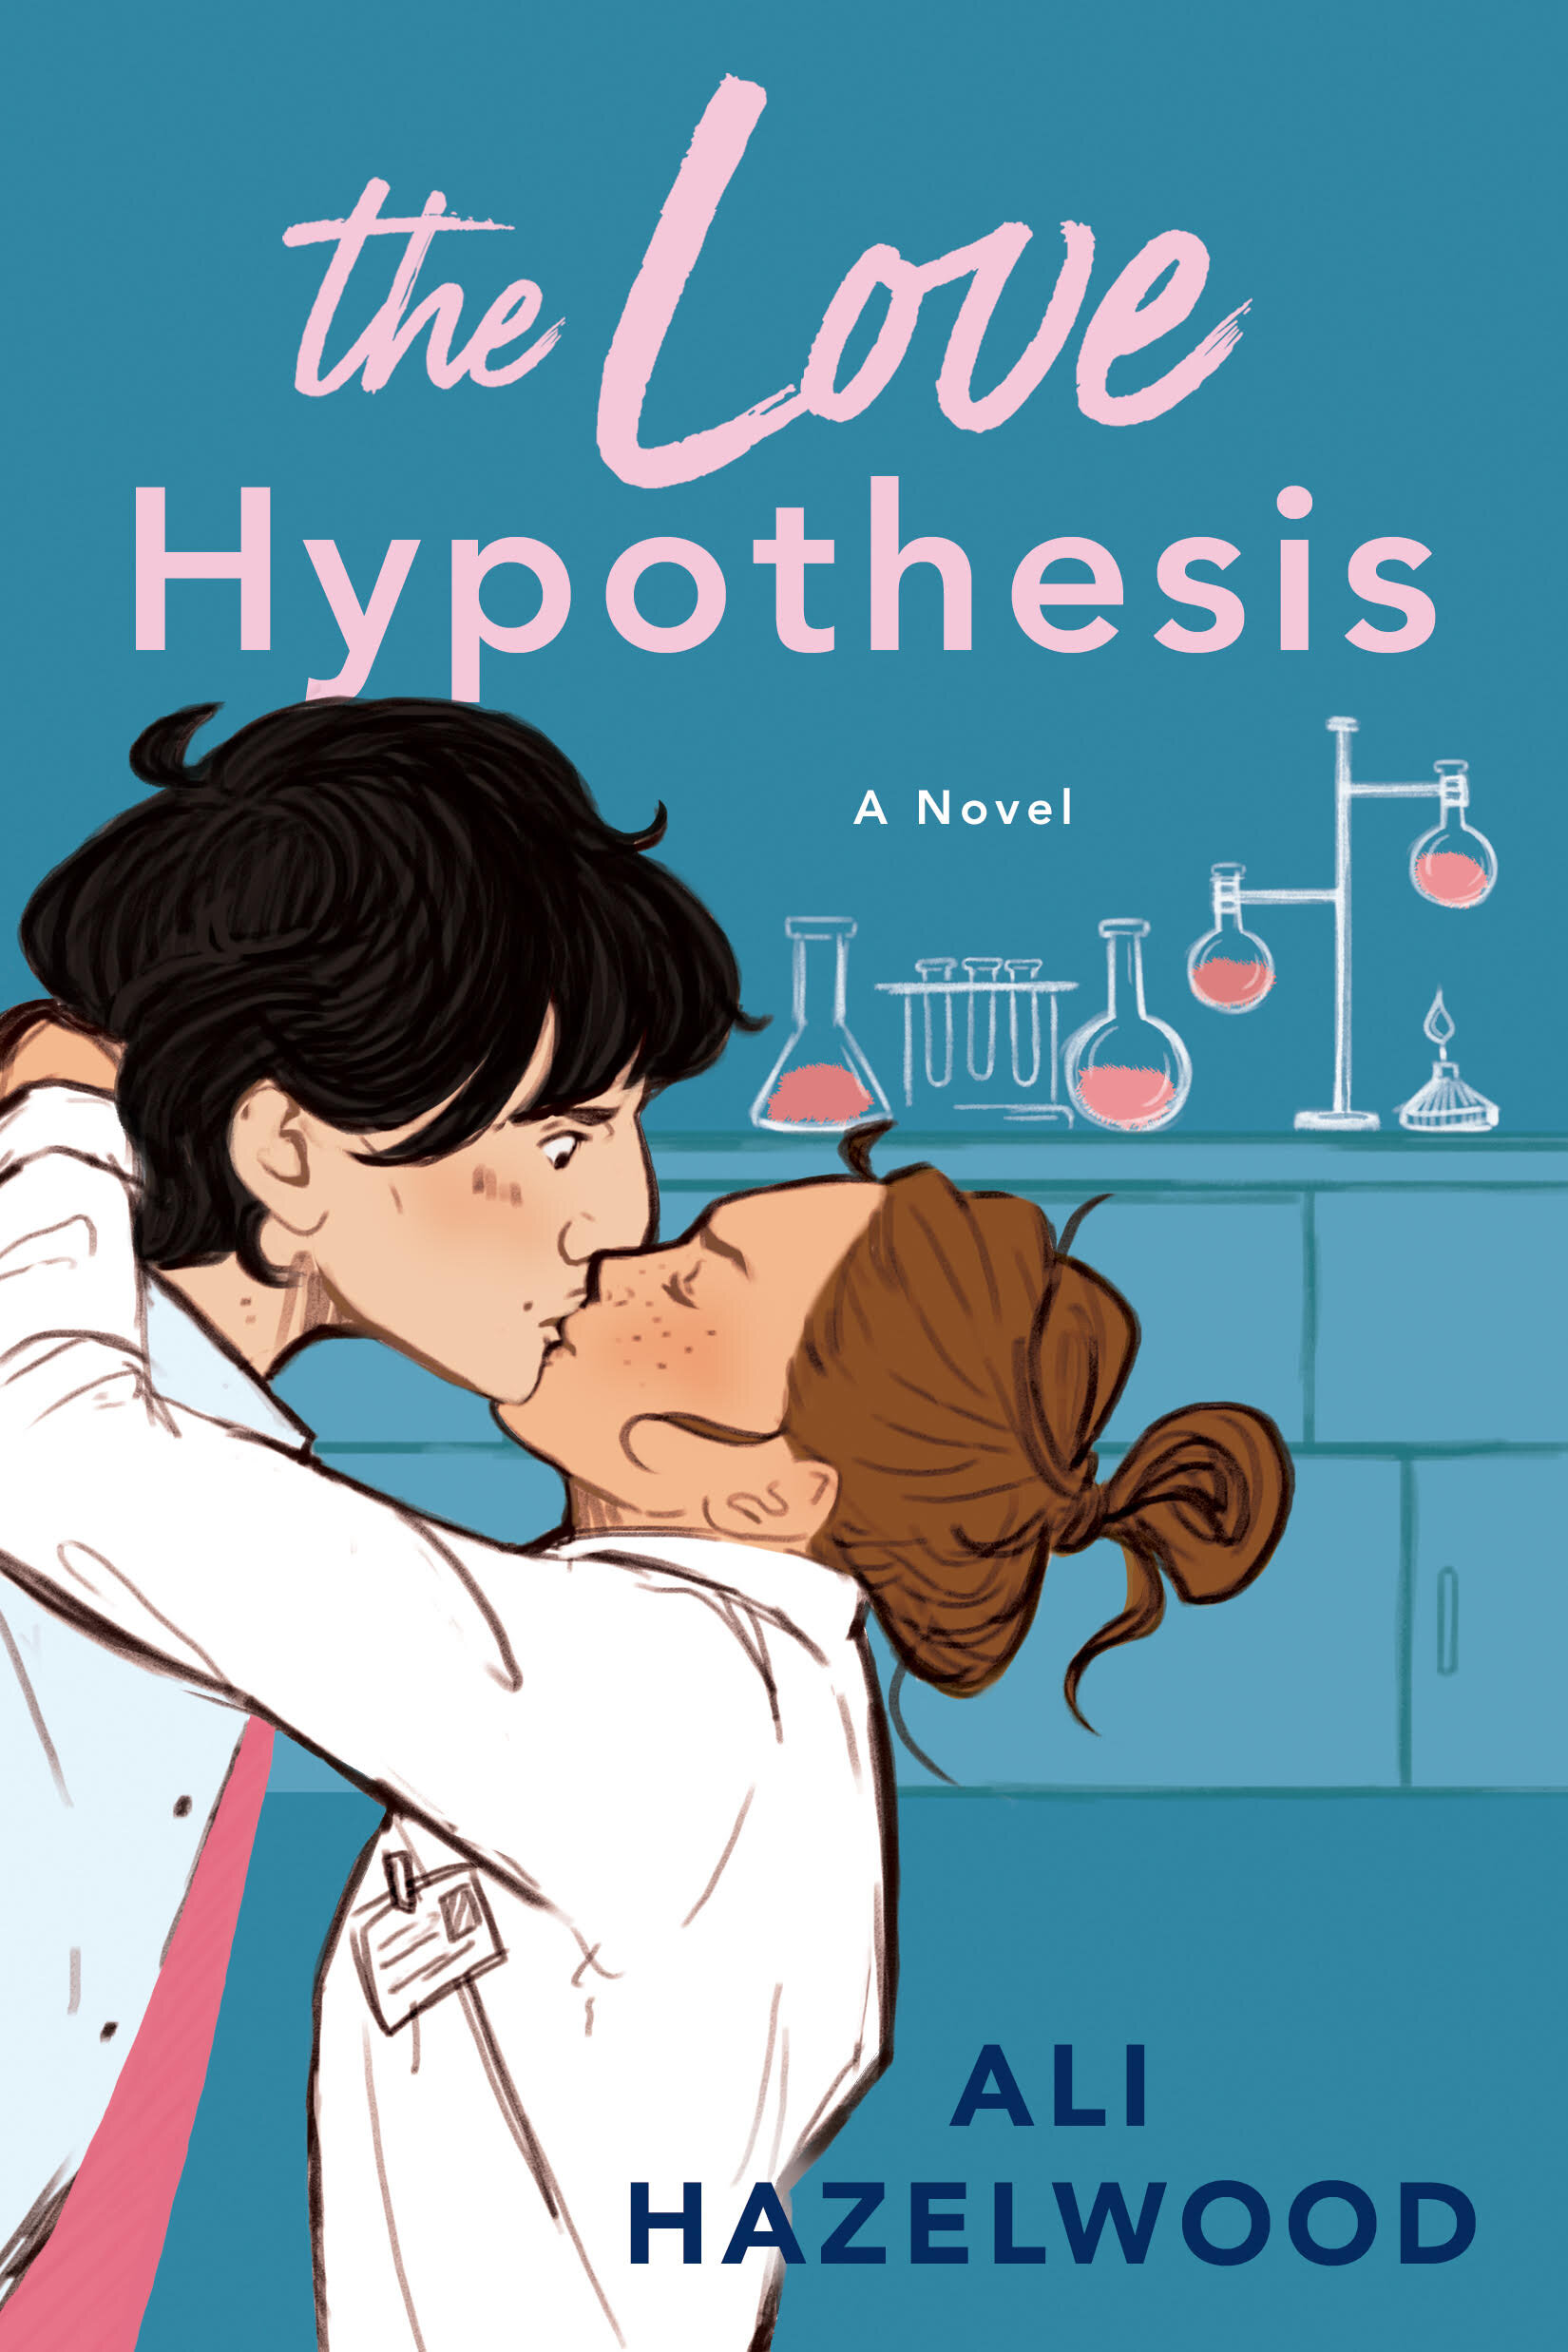 Does the love hypothesis have sex scenes